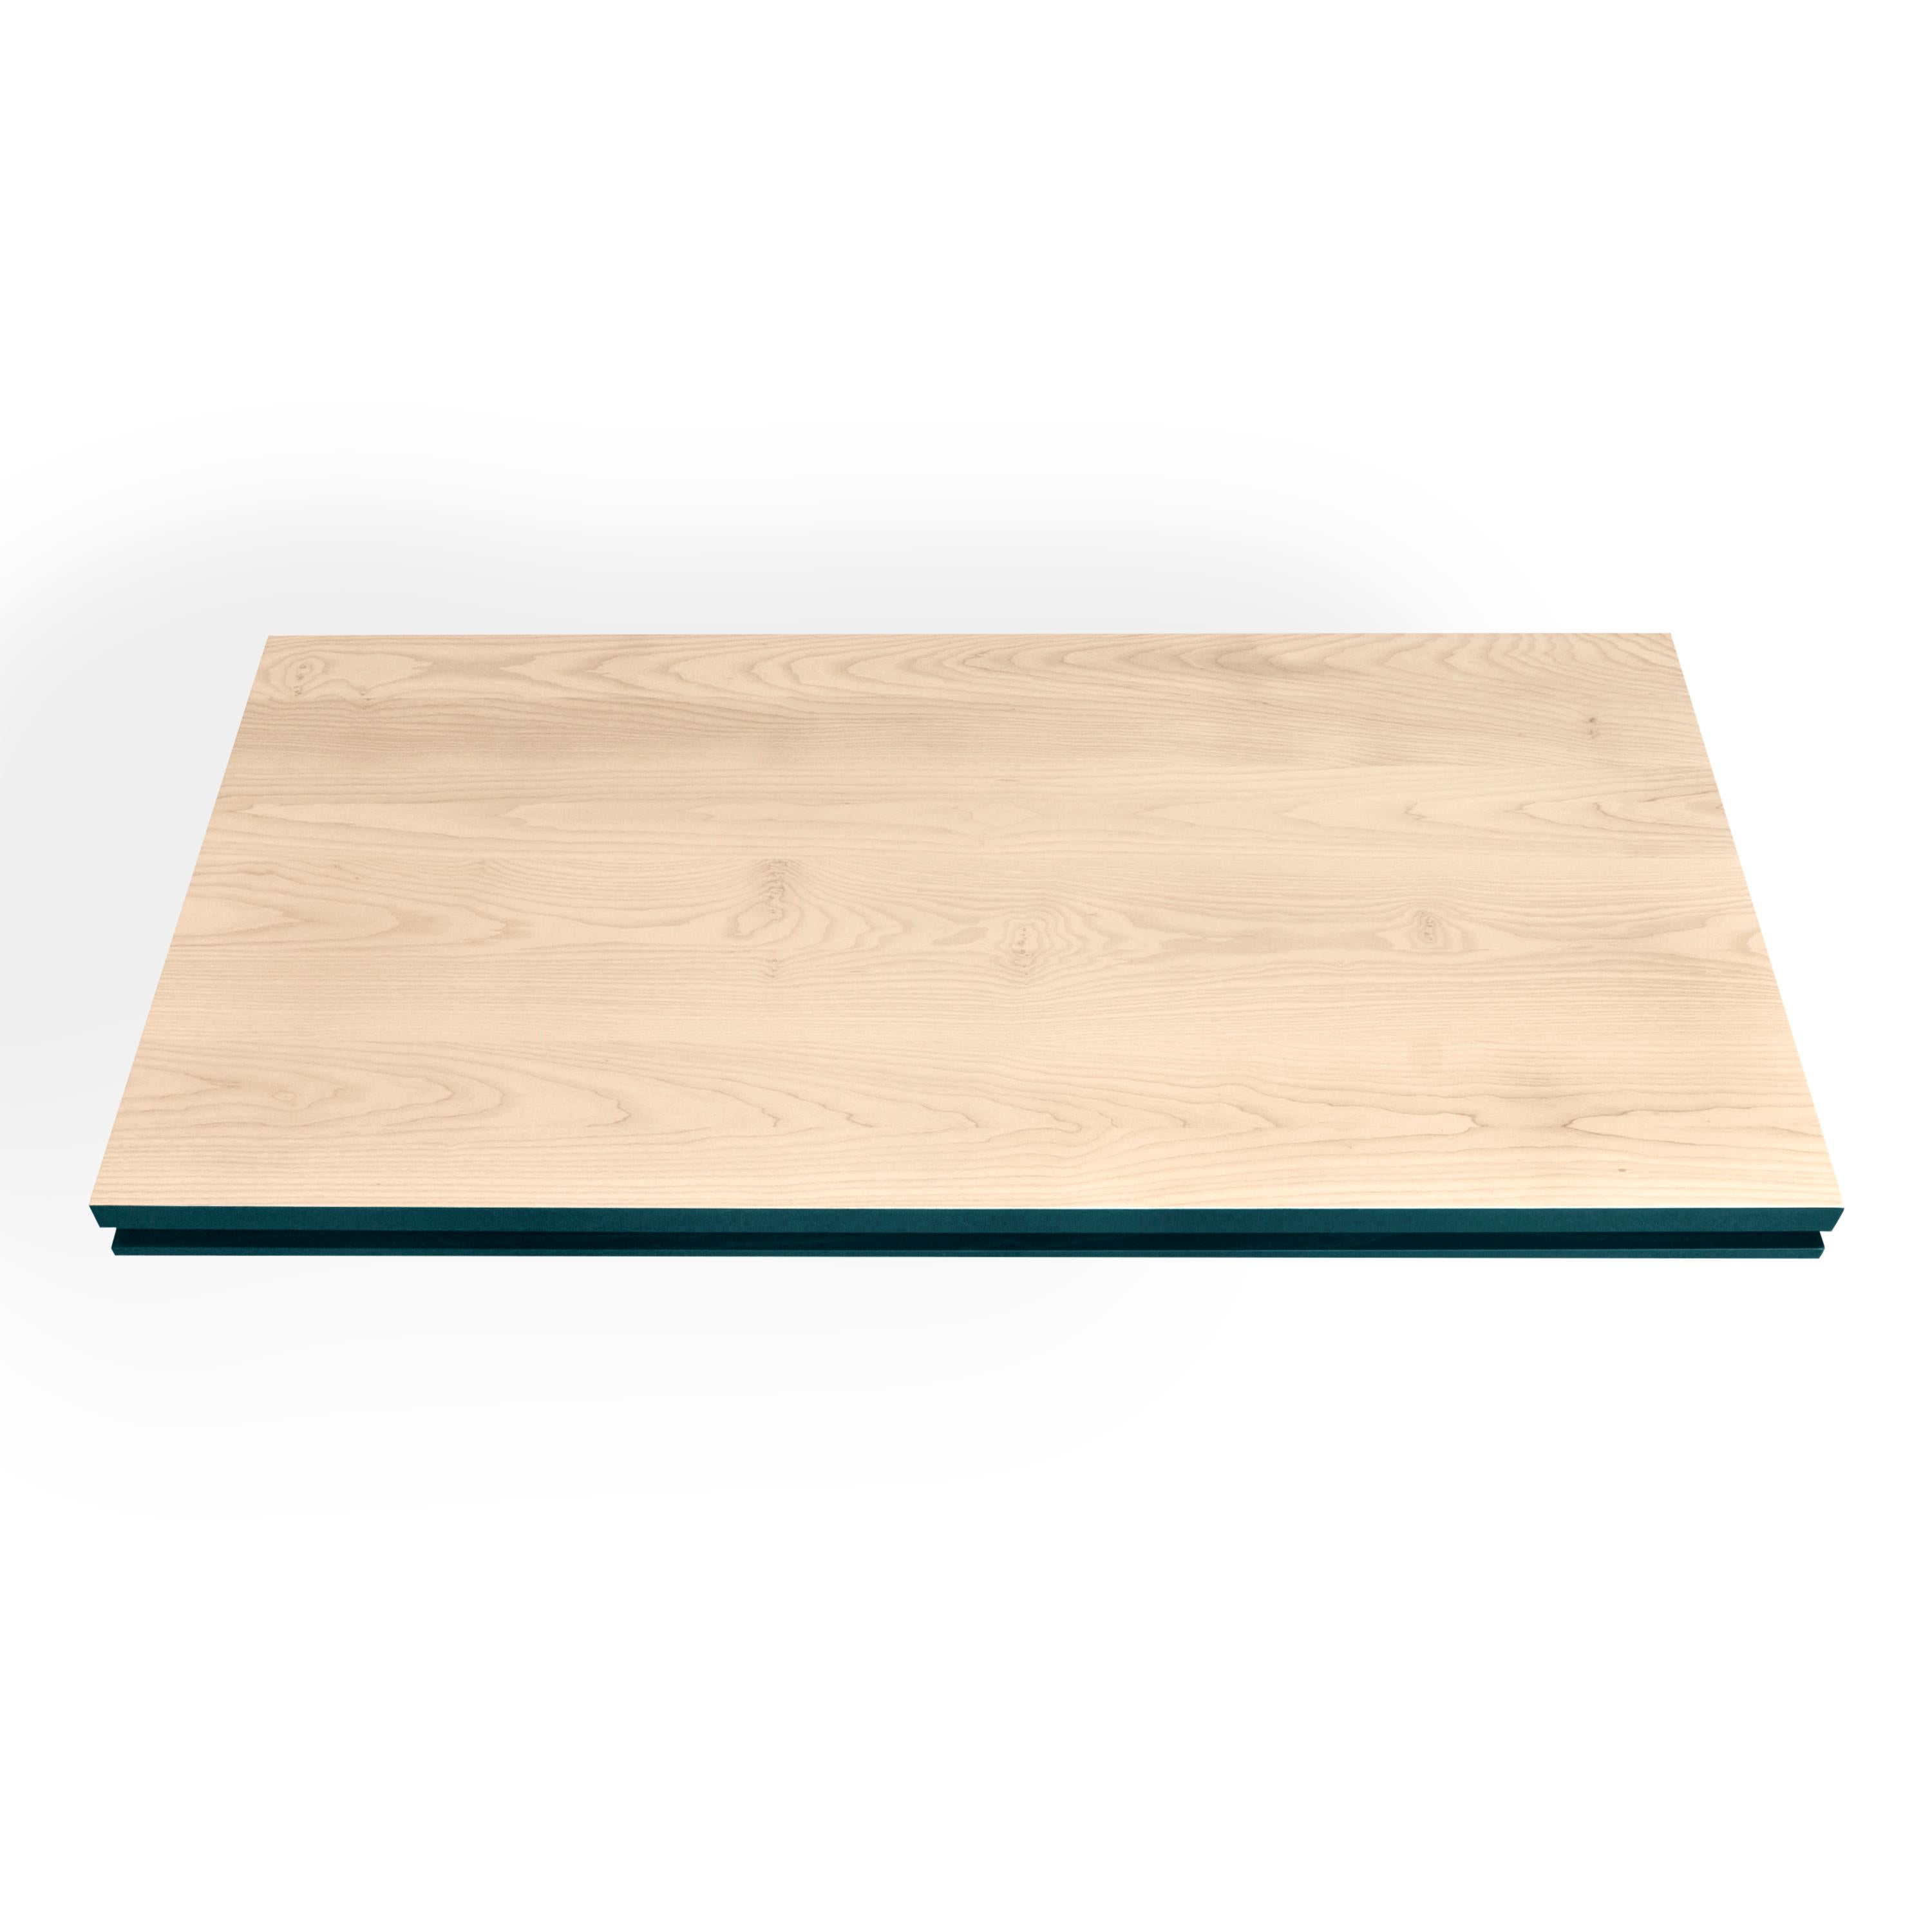 Sea Blue Extensible Design Table, 100% Solid Wood and Customizable For Sale 2